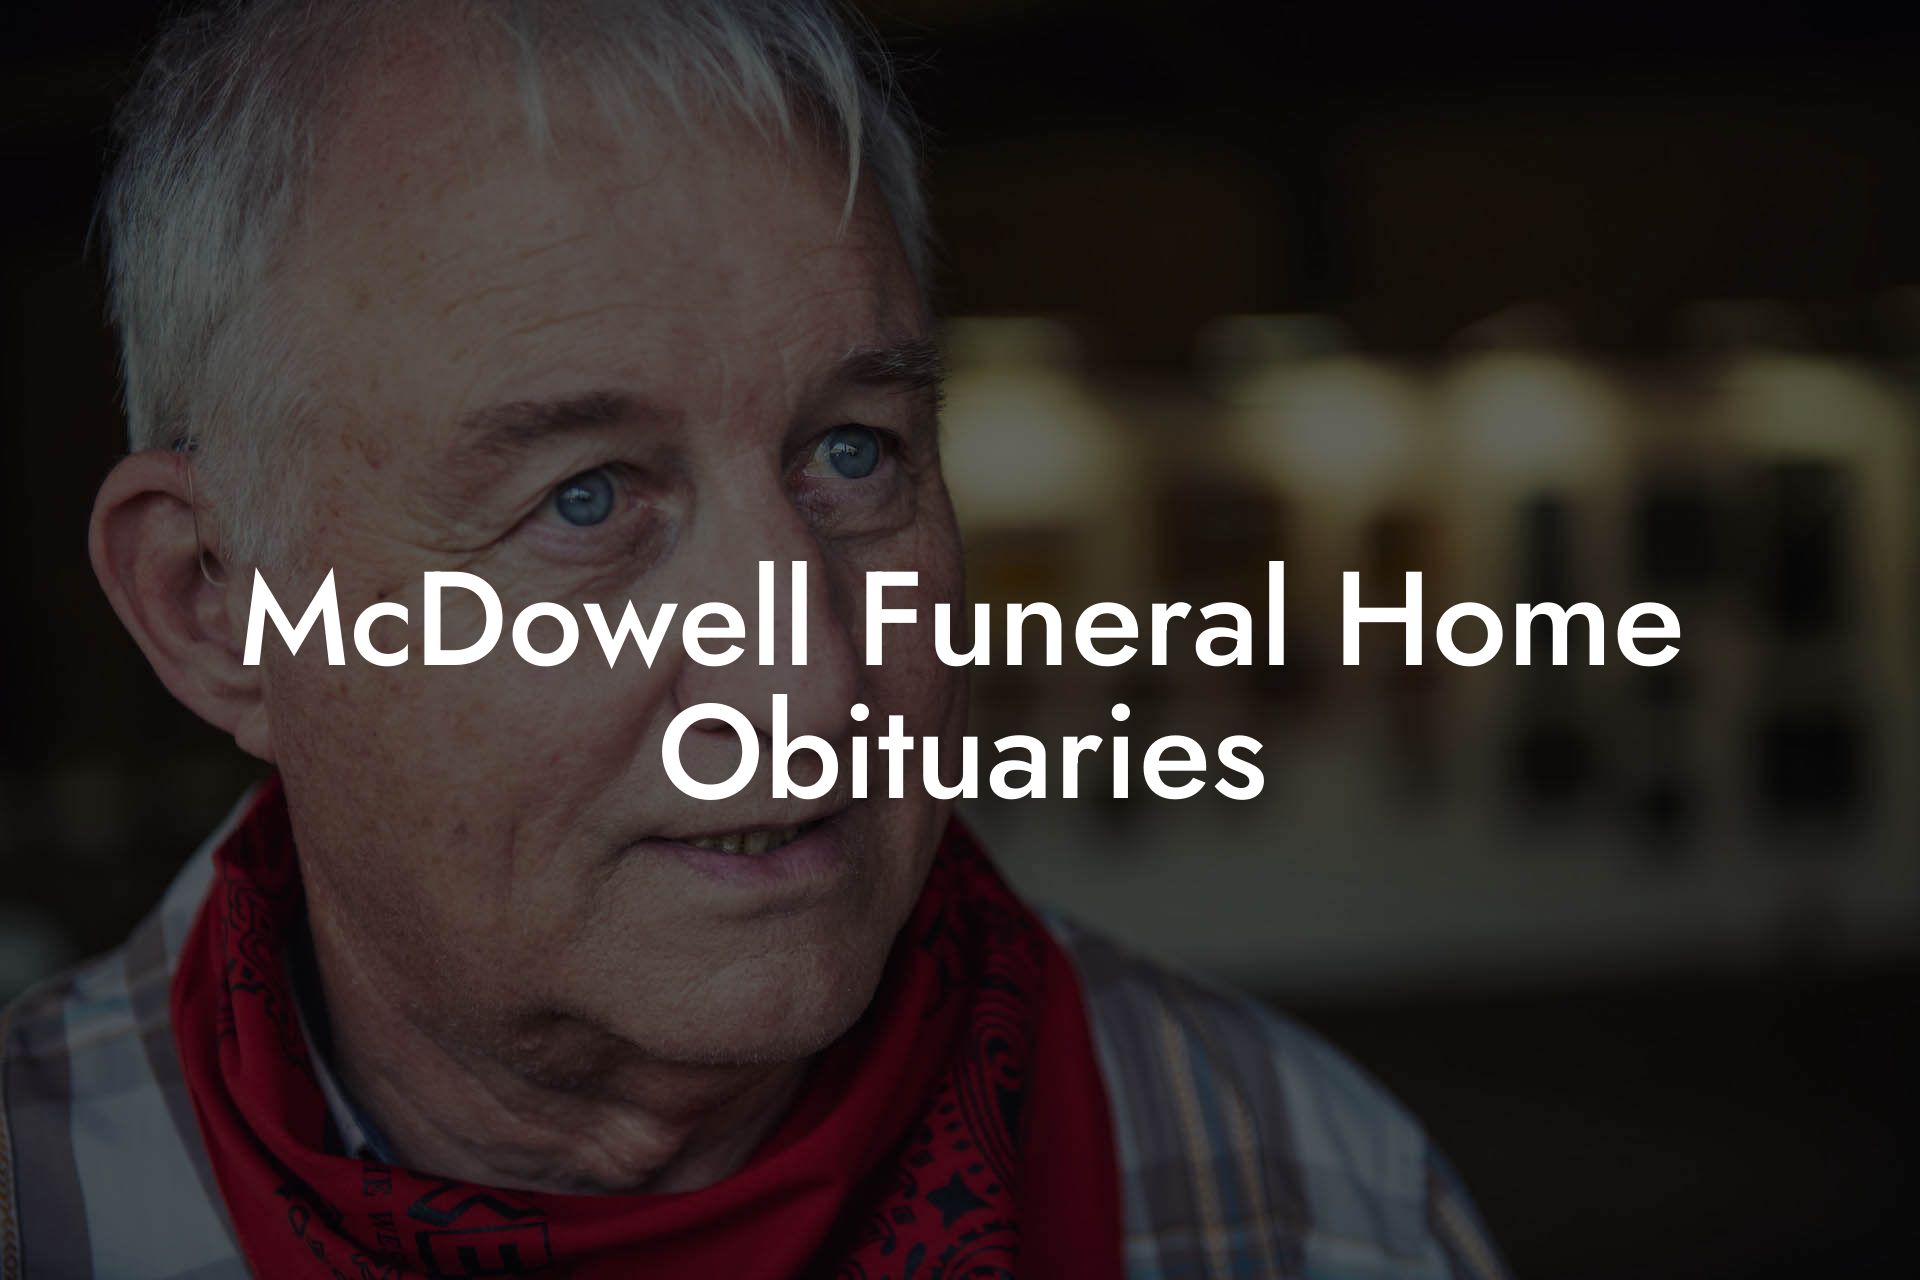 McDowell Funeral Home Obituaries